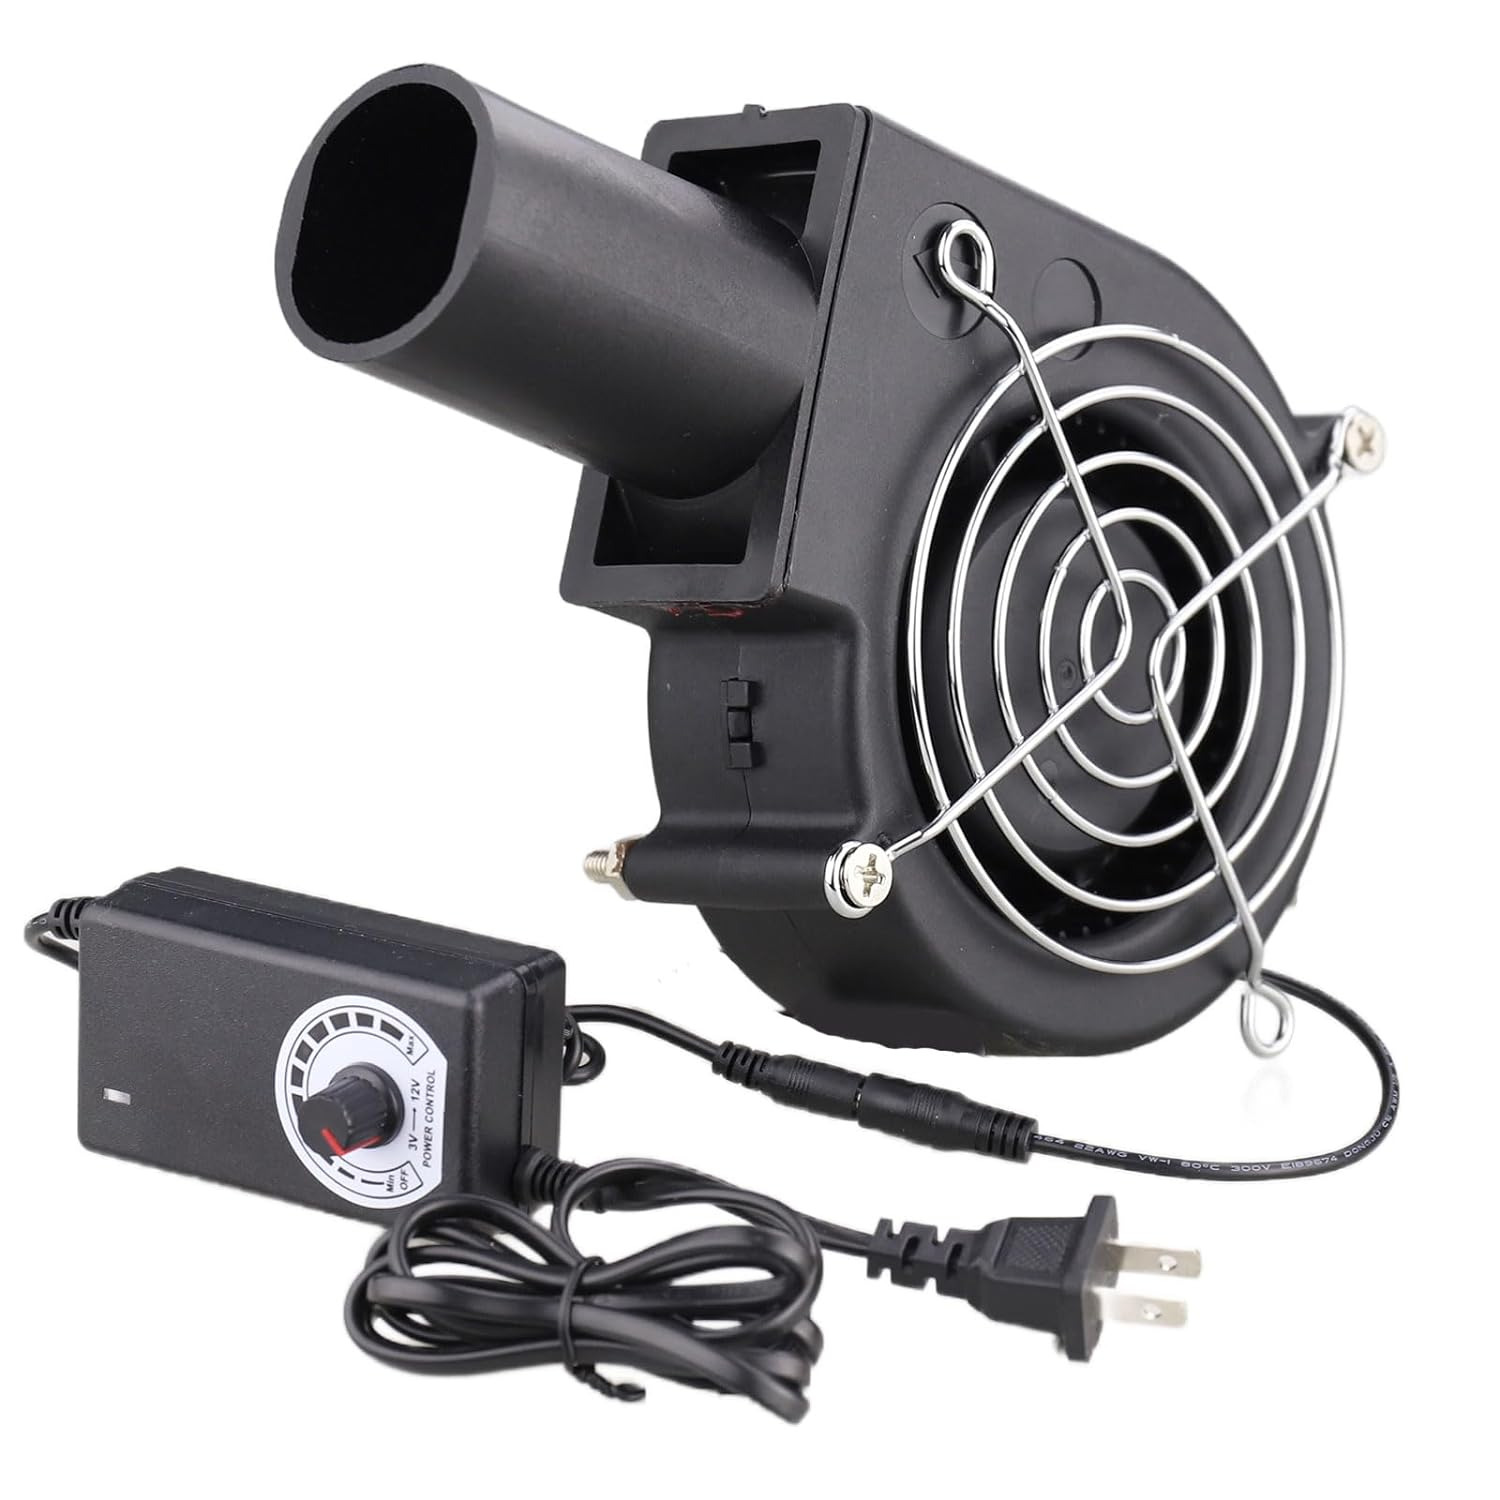  BBQ Air Mover Blower Fan 12V 97Mm X 33Mm,Variable Speed Centrifugal Fan with 11